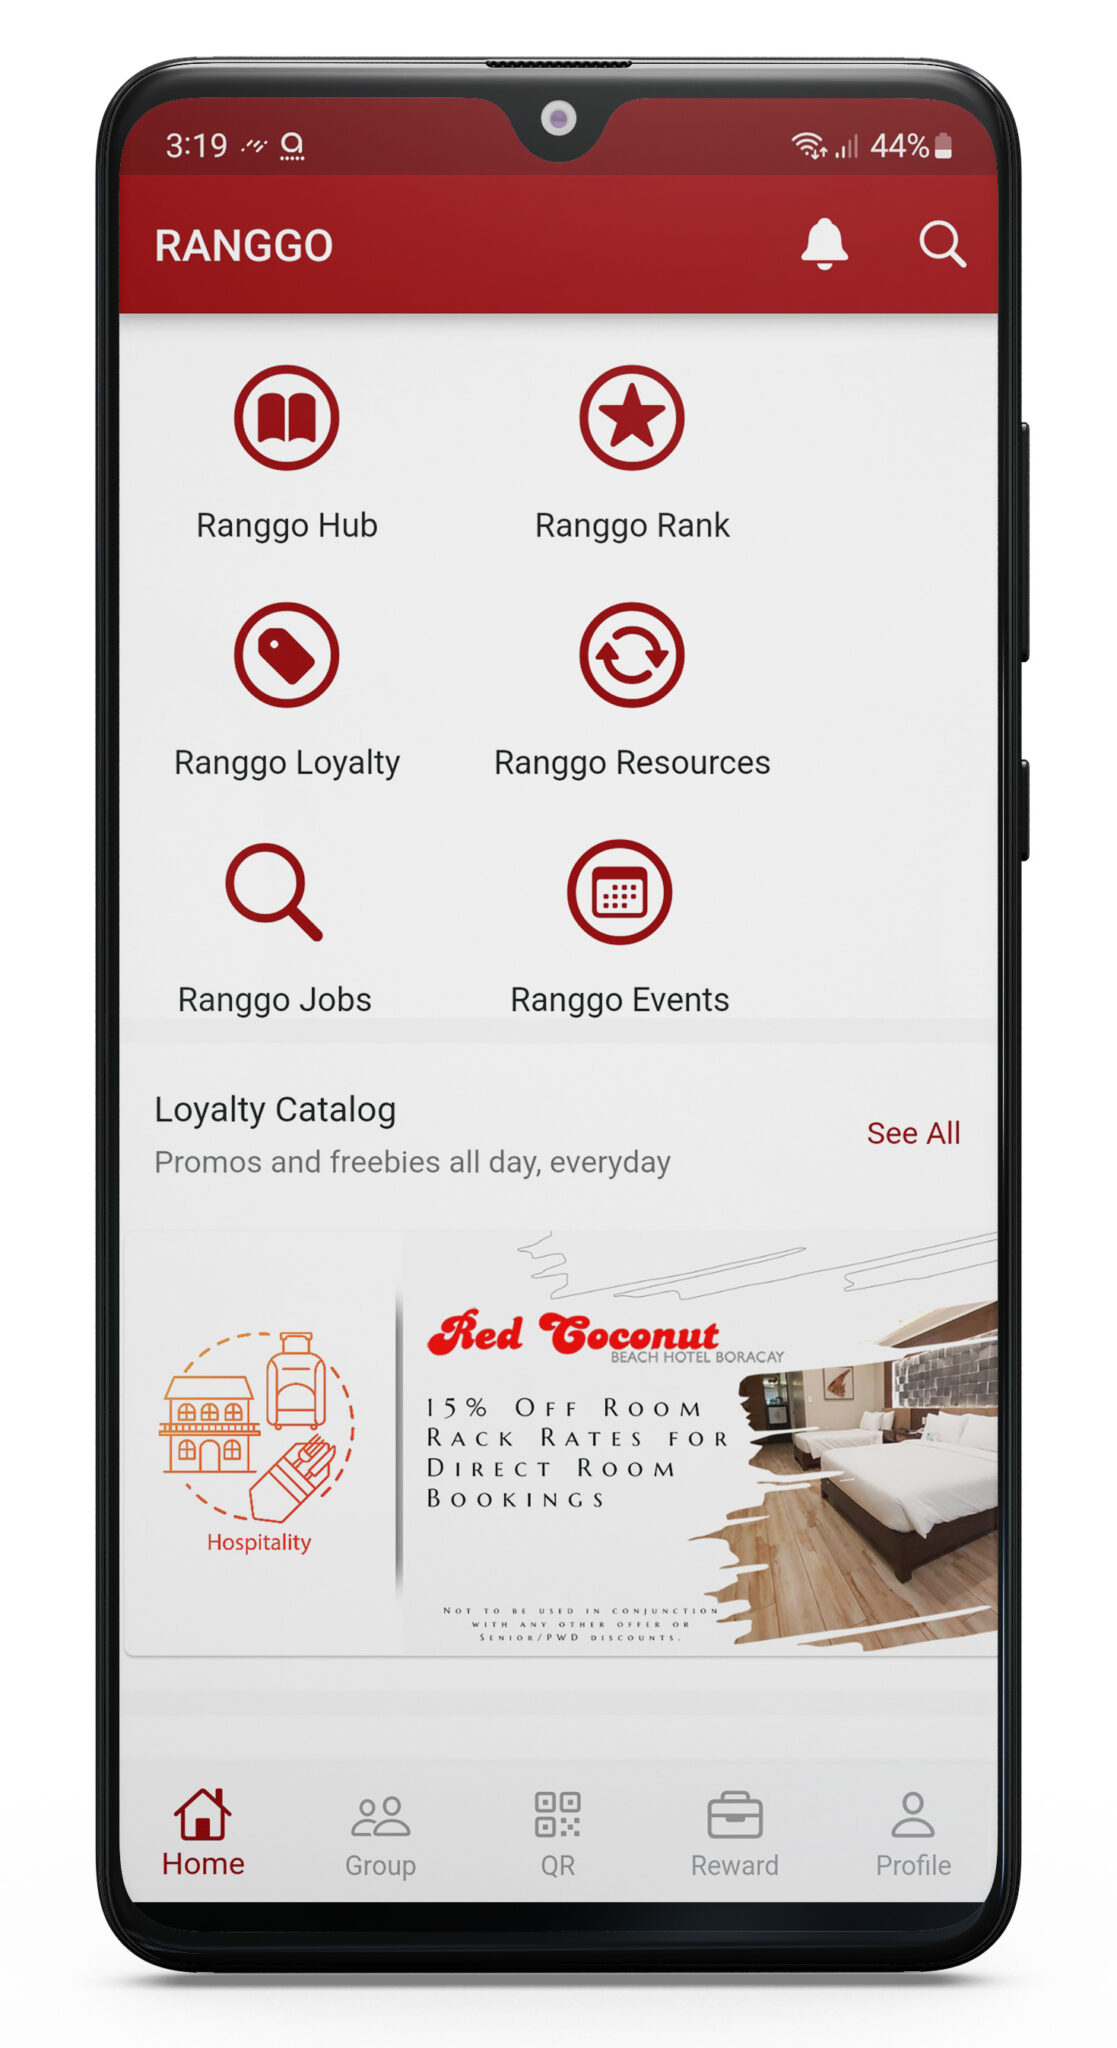 Home Screen of the RANGGO App showing it's functions including RANGGO Events. How to Create and Share Events MY RANGGO Hospitality Magazine Philippines